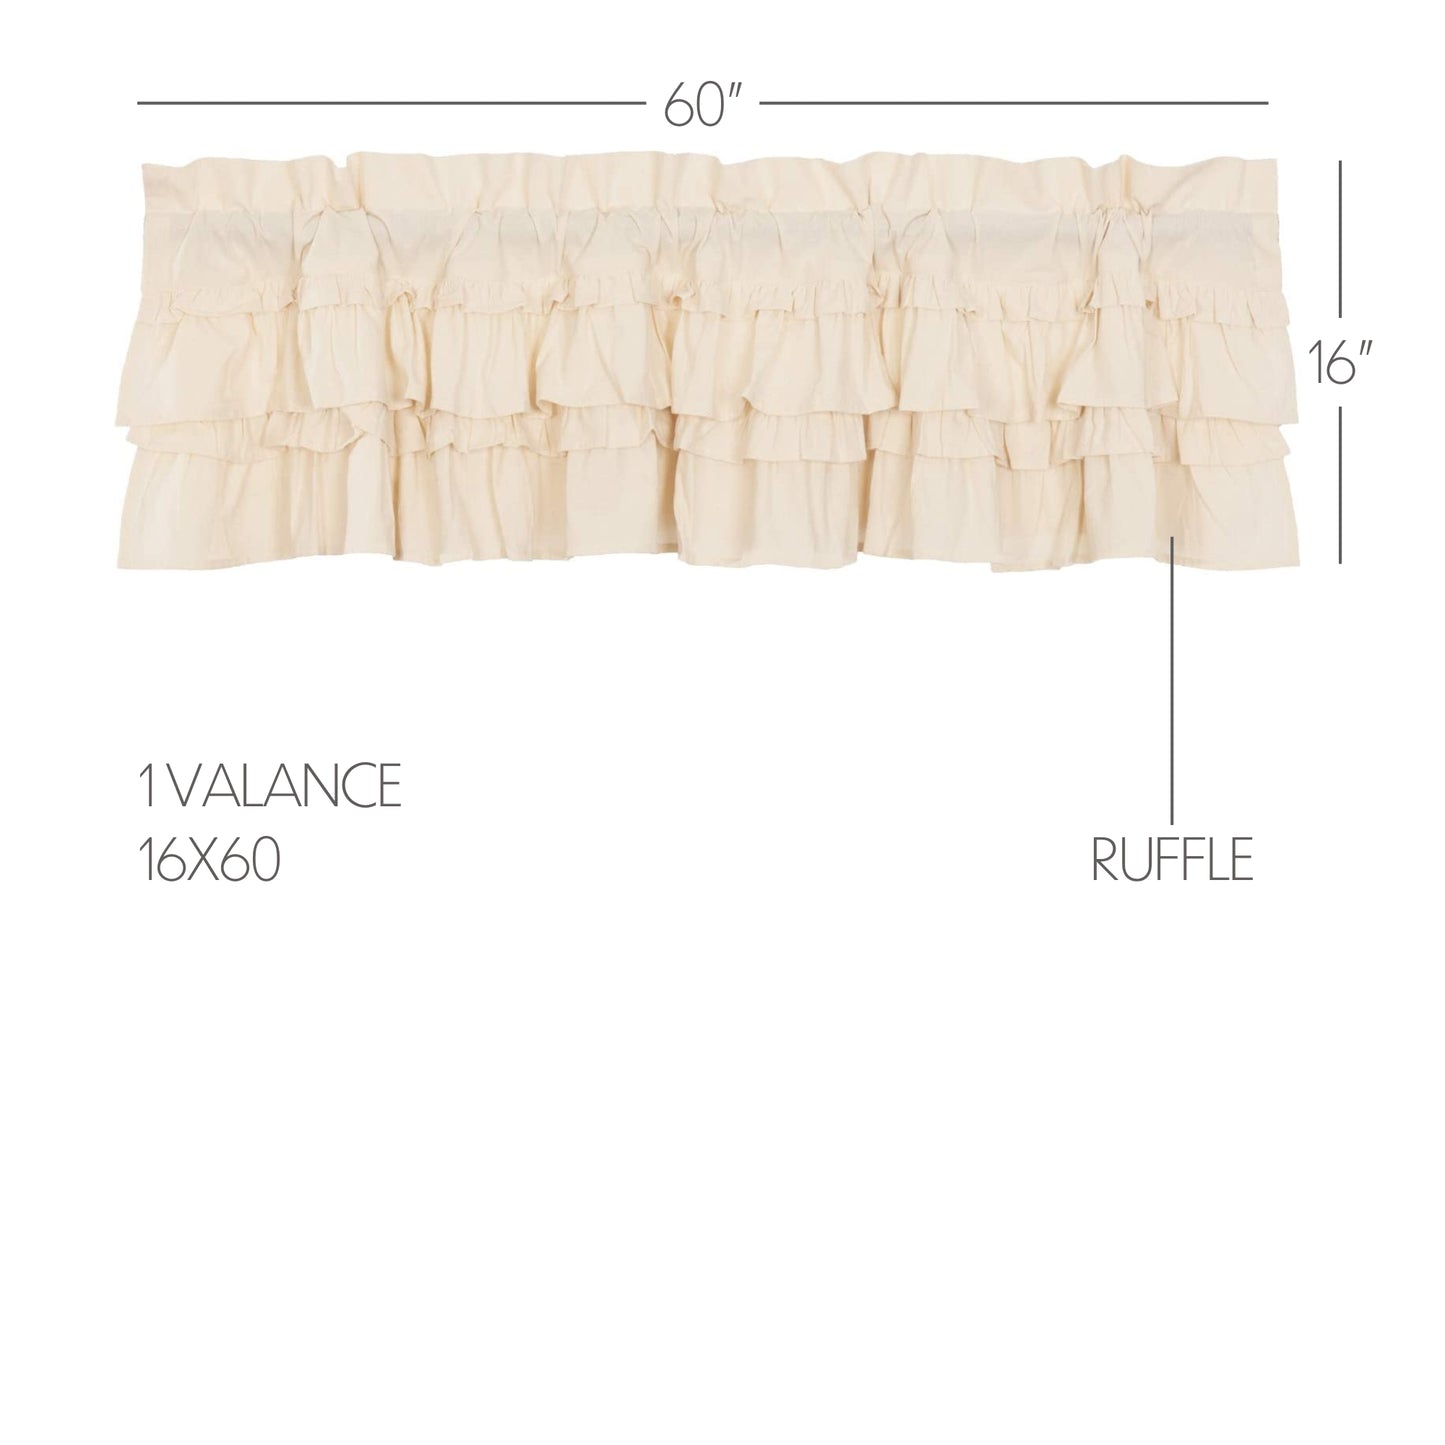 51991-Muslin-Ruffled-Unbleached-Natural-Valance-16x60-image-1